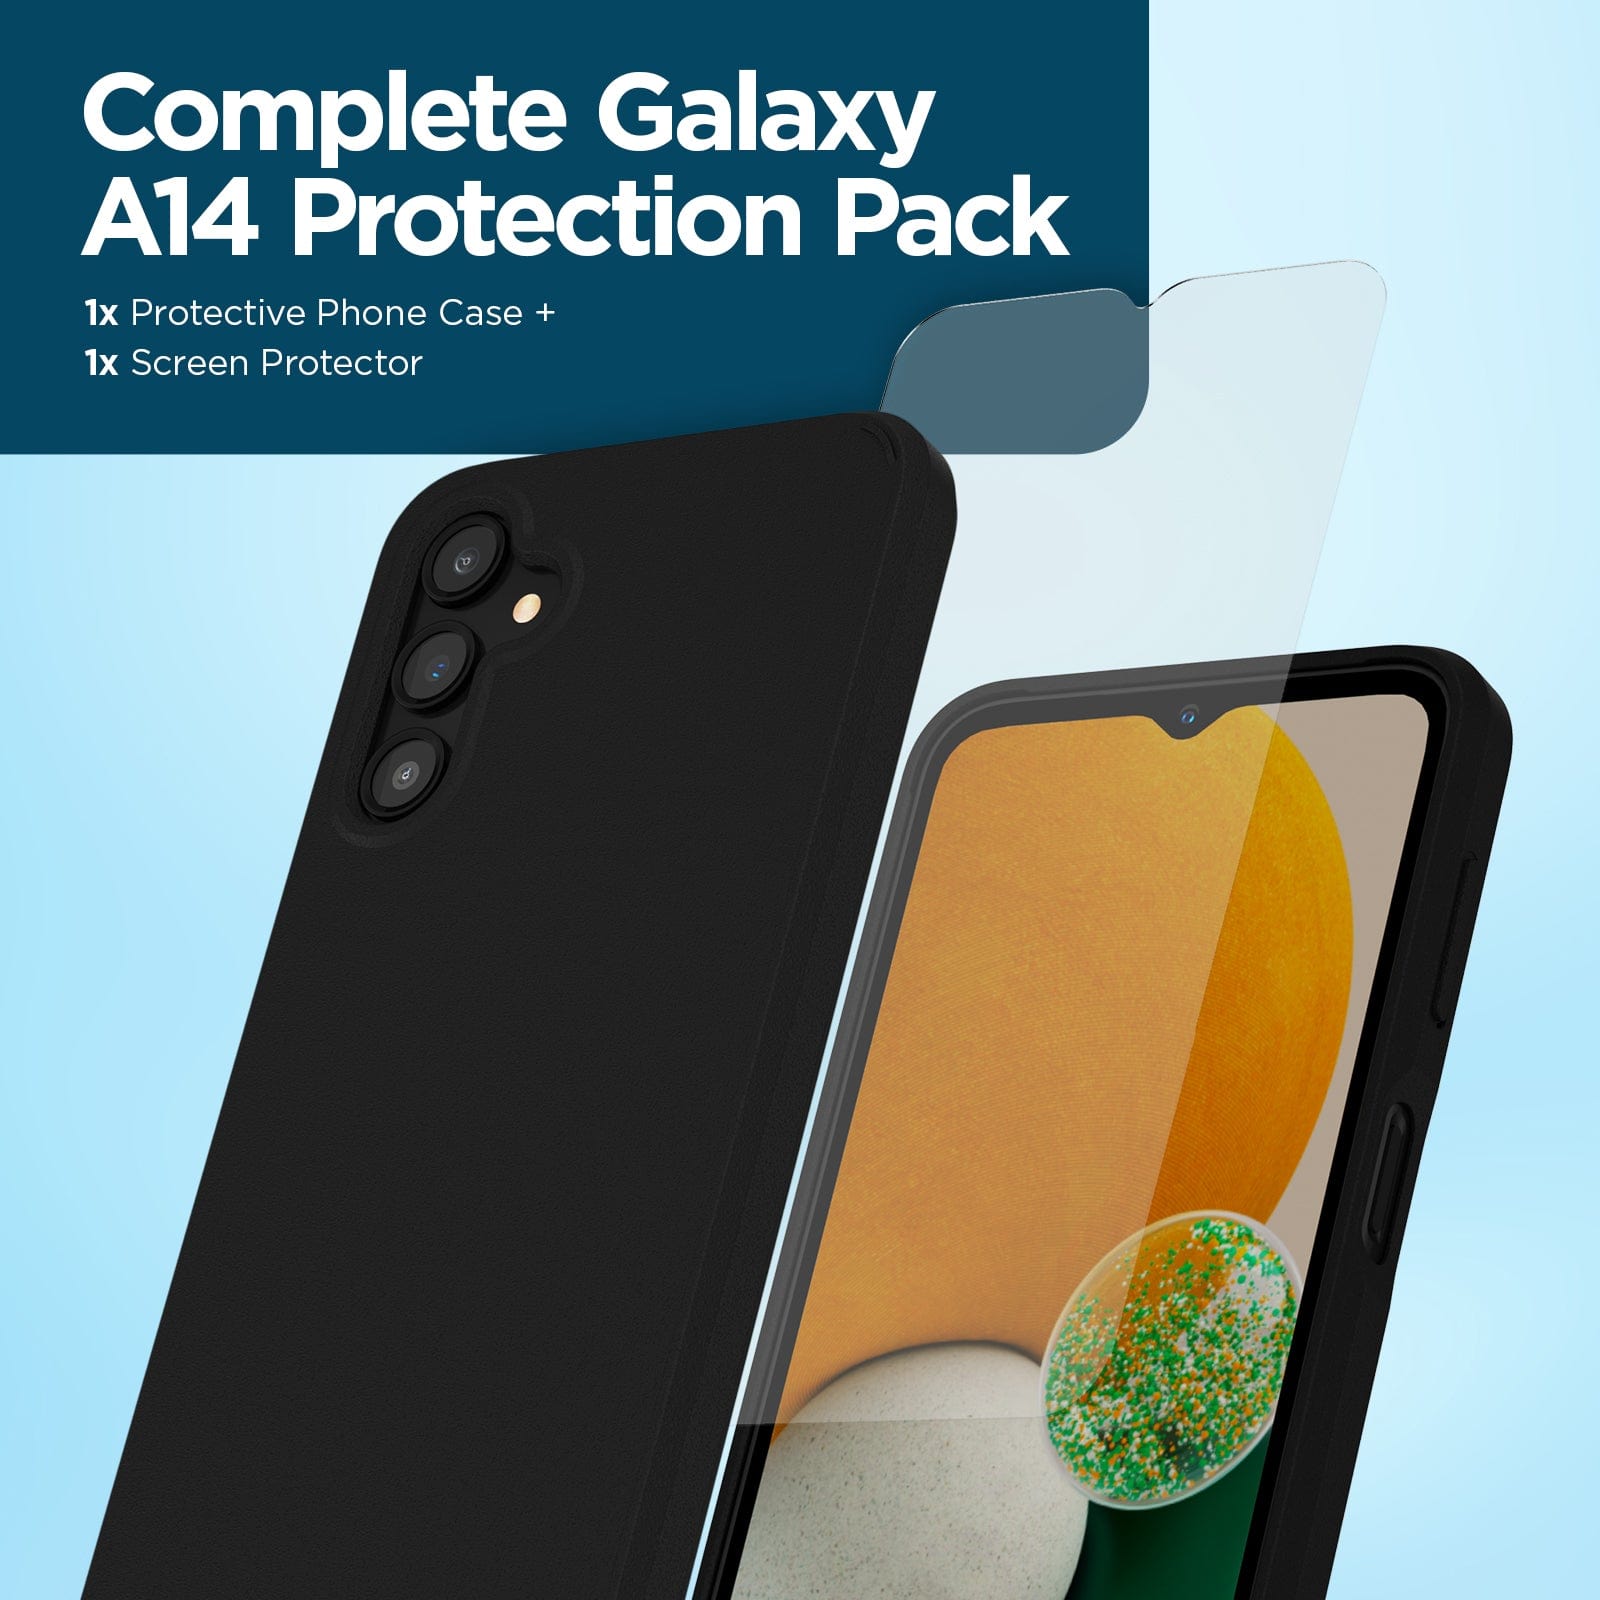 Complete Galaxy A14 Protection Pack. 1x Protective Phone Case + 1x Screen Protector